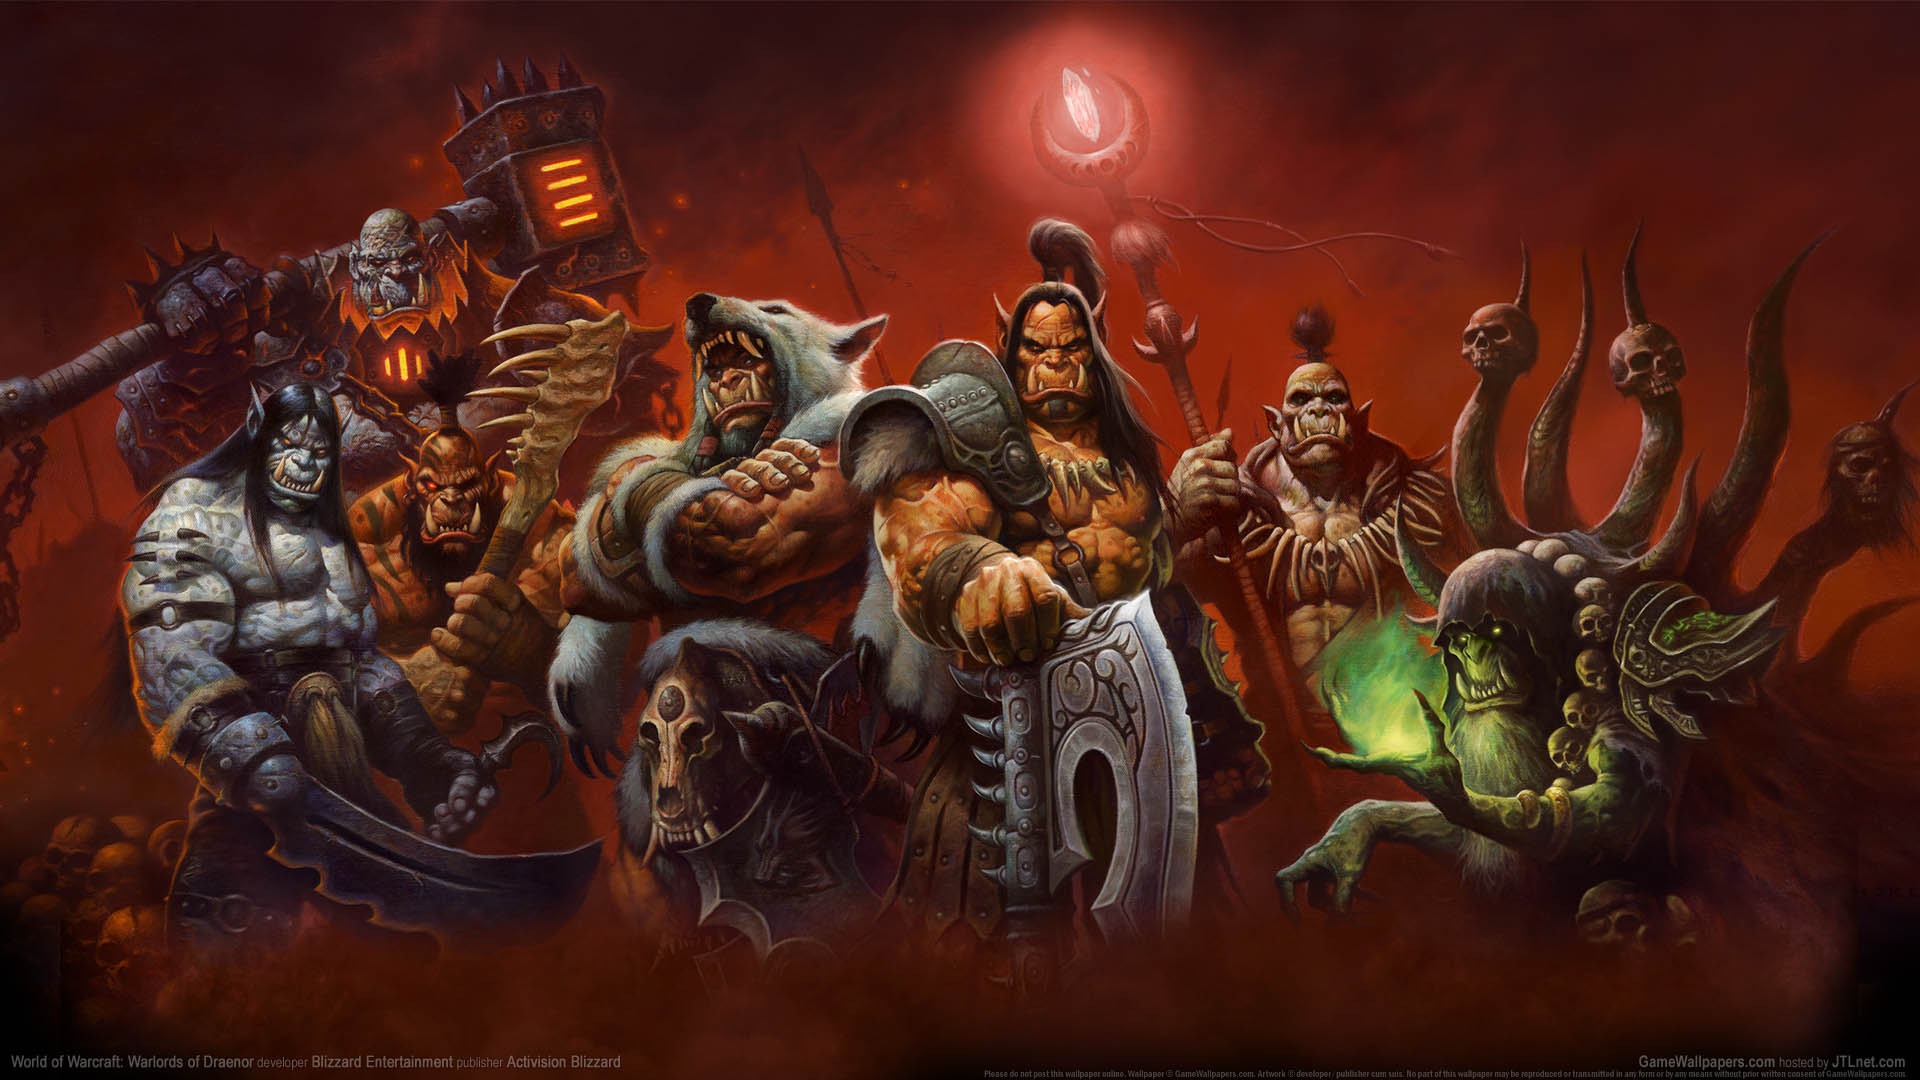 World of Warcraft: Warlords of Draenor achtergrond 01 1920x1080